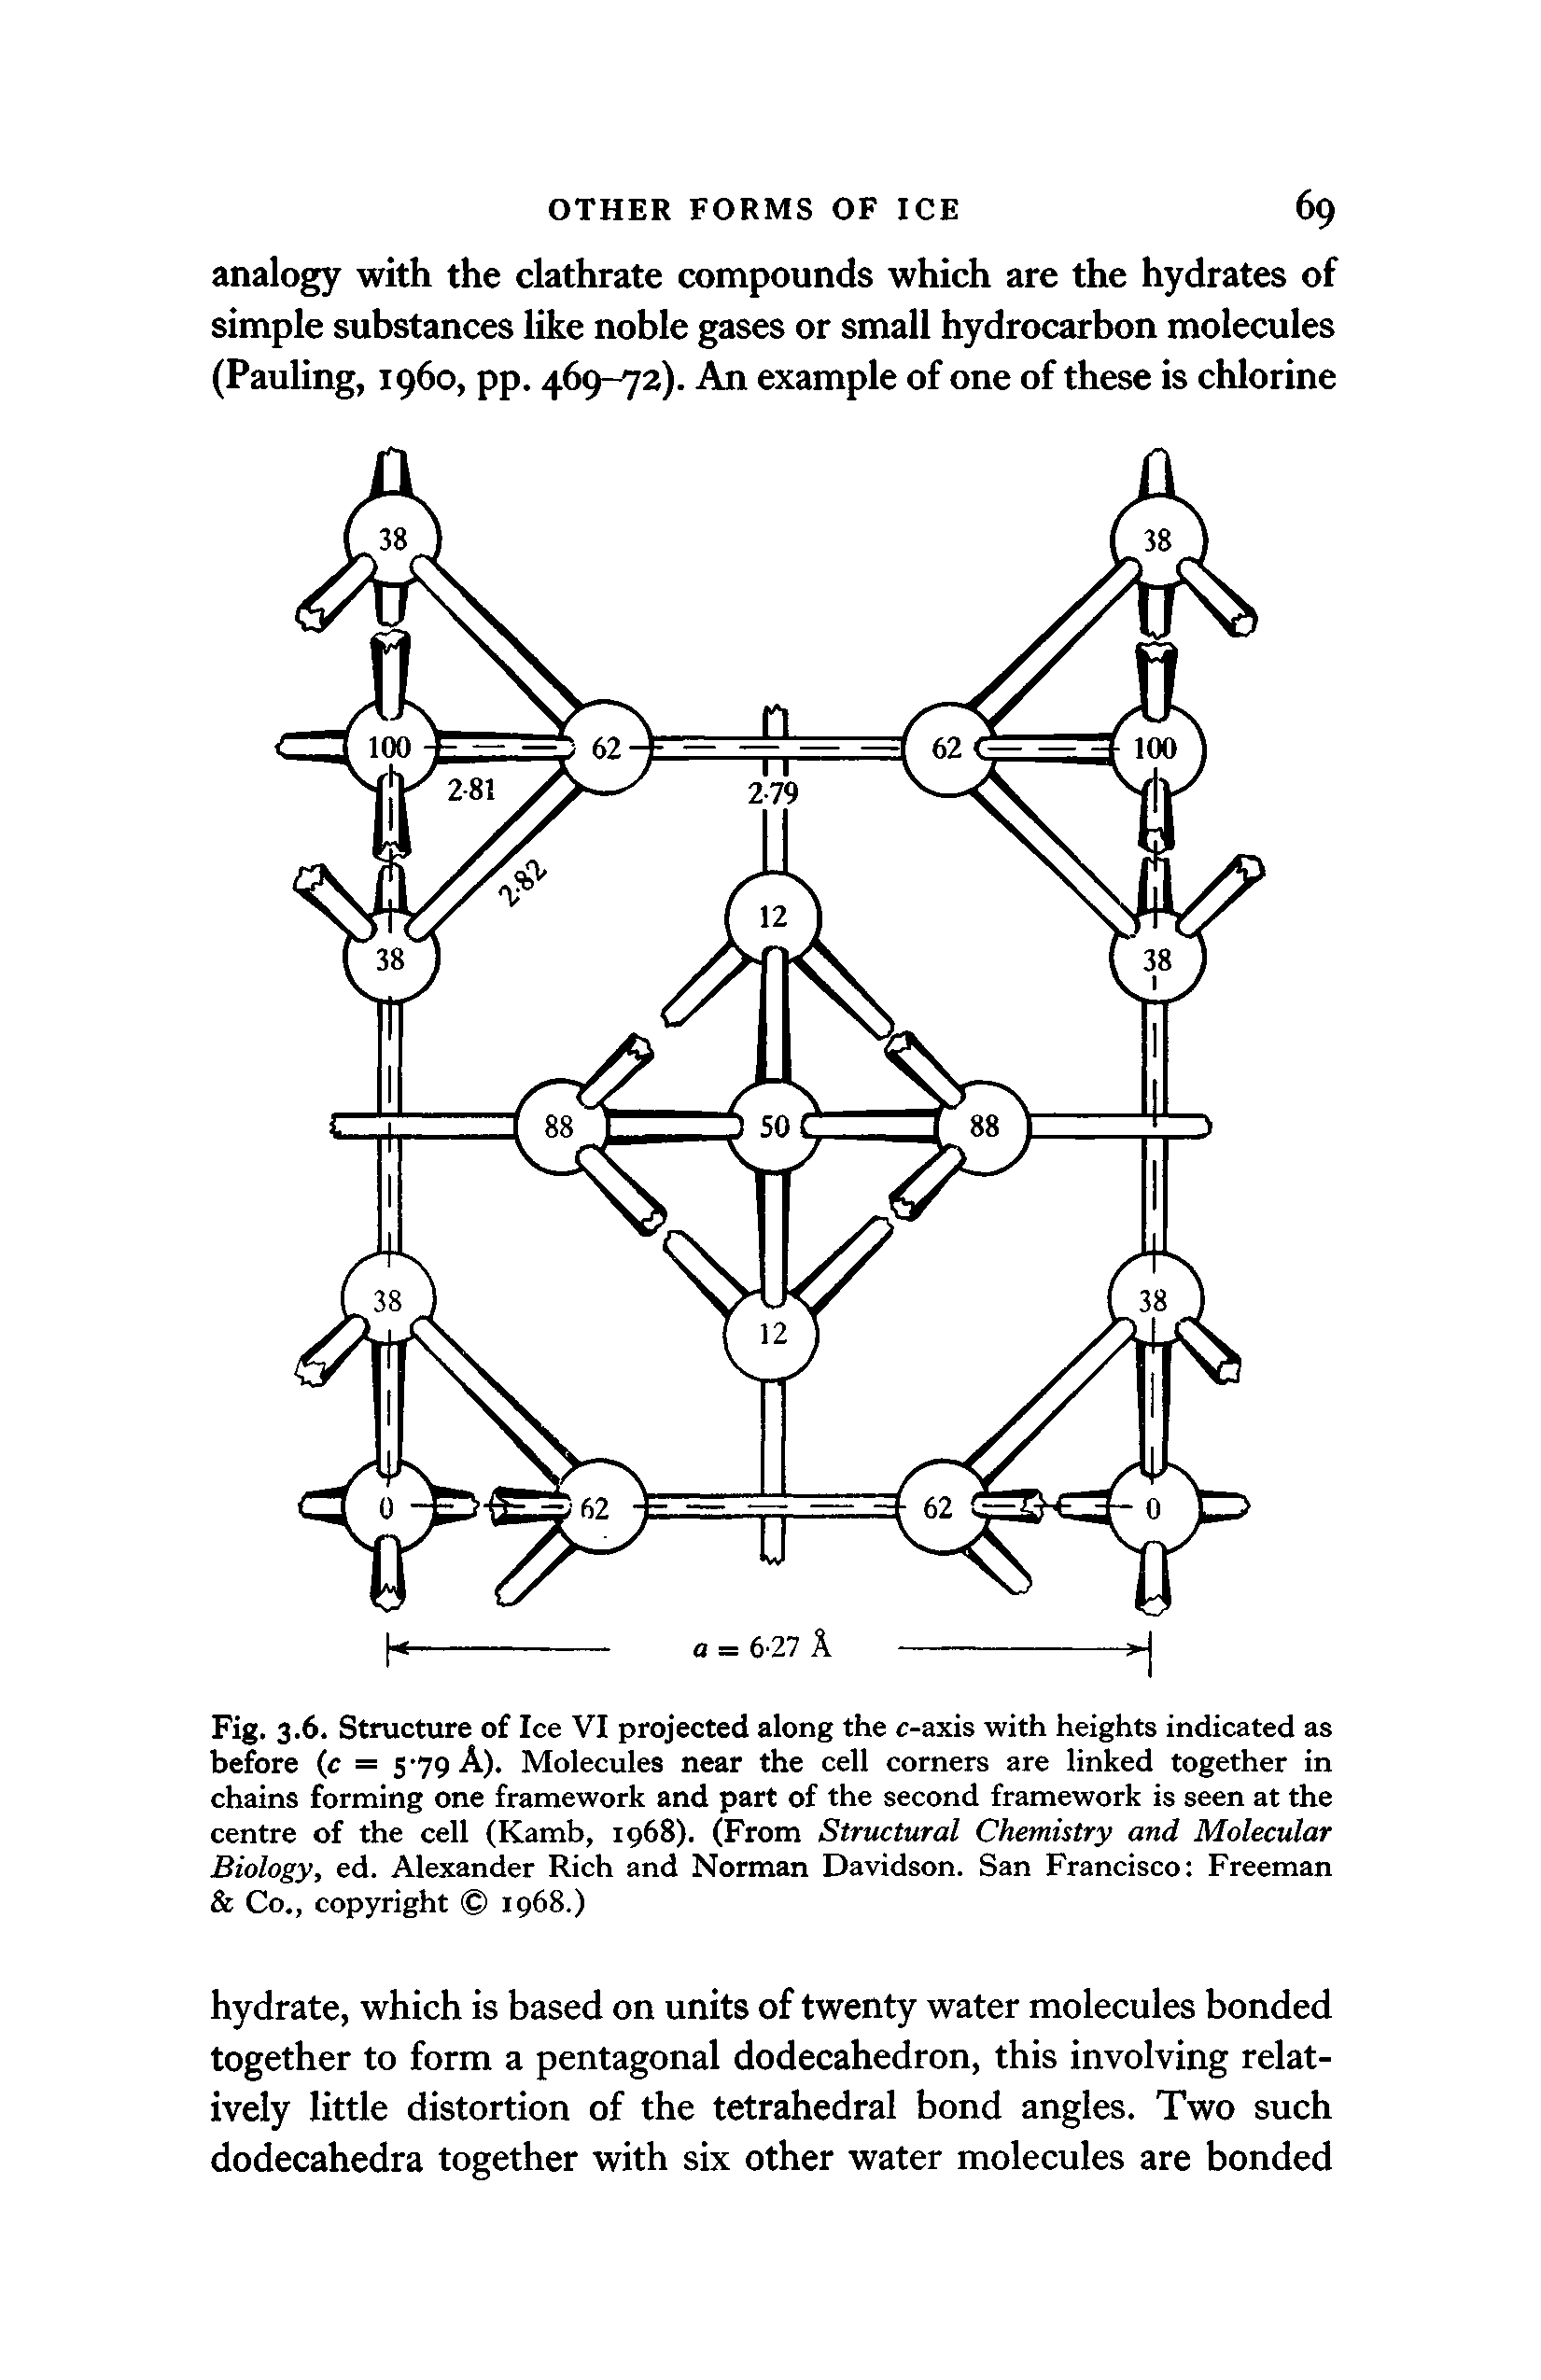 Fig. 3.6. Structure of Ice VI projected along the c-axis with heights indicated as before (c = 5-79 A). Molecules near the cell corners are linked together in chains forming one framework and part of the second framework is seen at the centre of the cell (Kamb, 1968). (From Structural Chemistry and Molecular Biology, ed. Alexander Rich and Norman Davidson. San Francisco Freeman Co., copyright 1968.)...